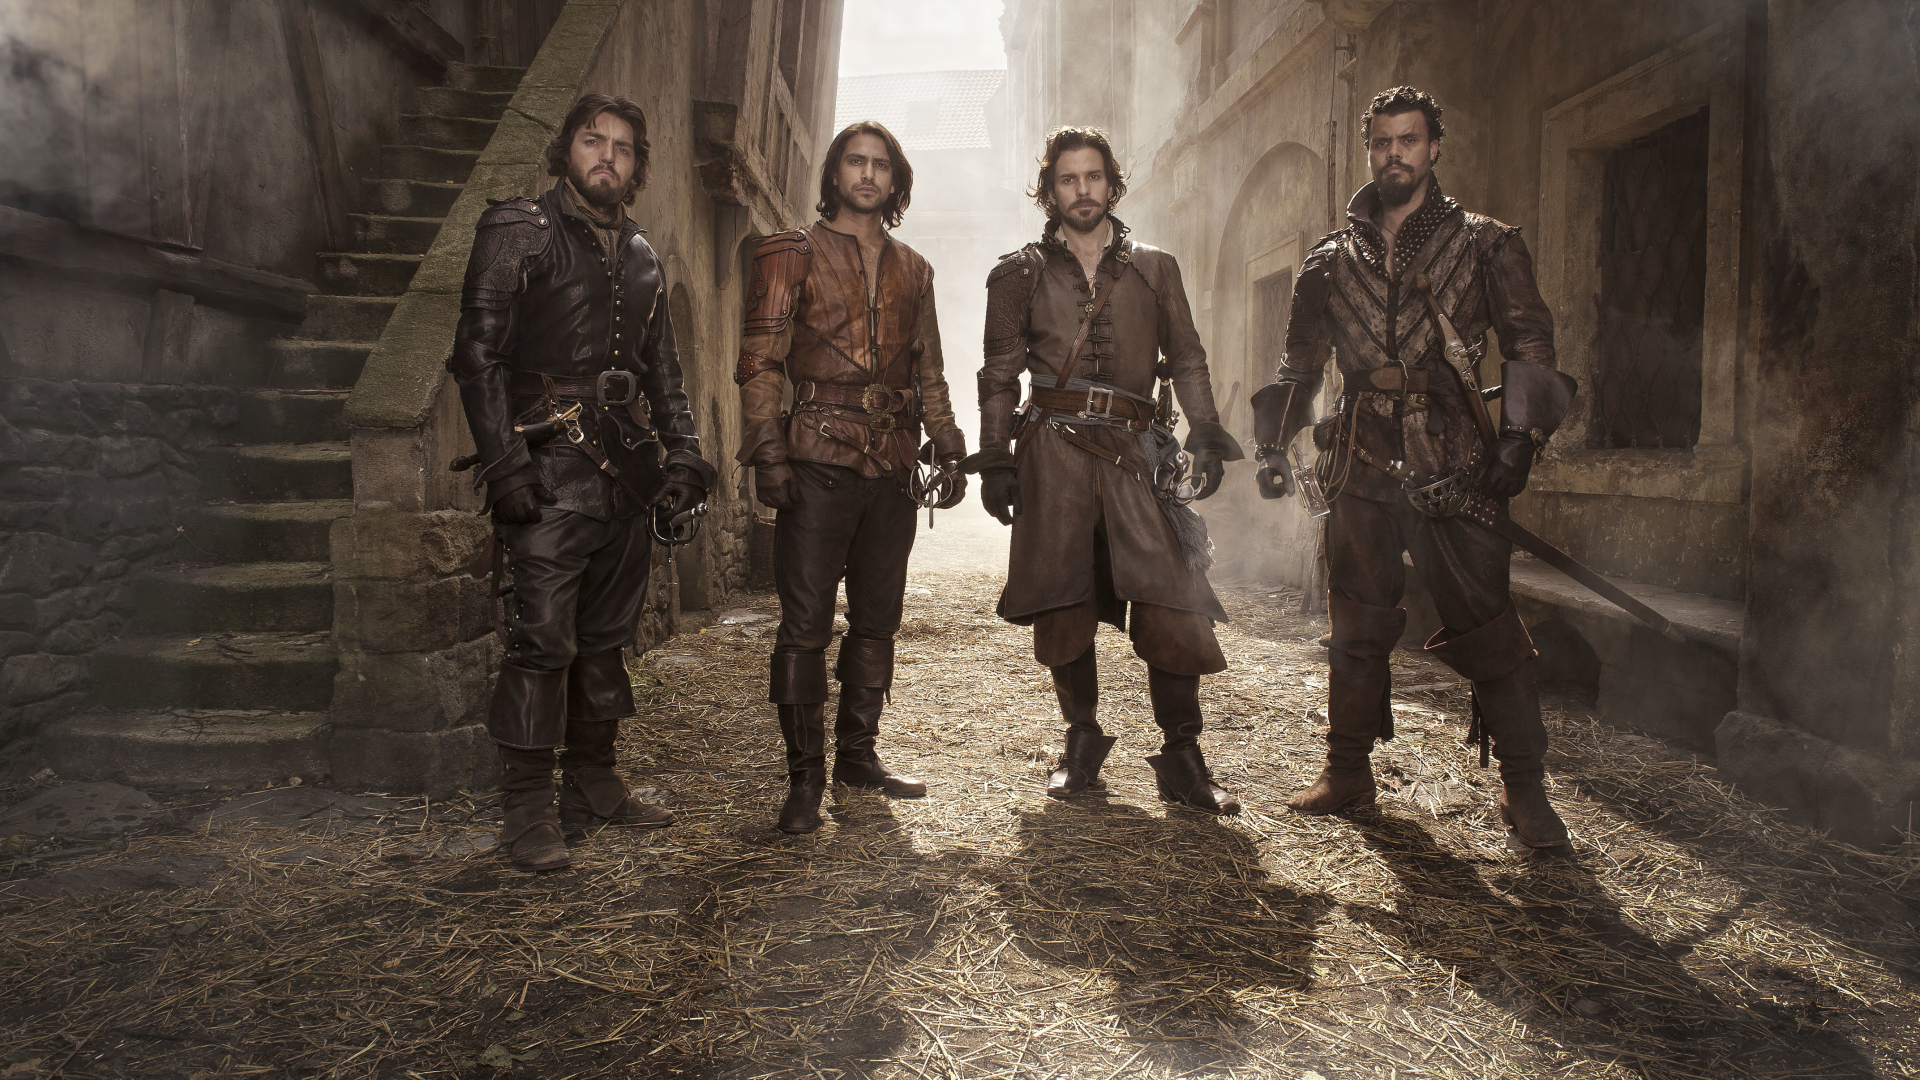 The Musketeers Wallpapers